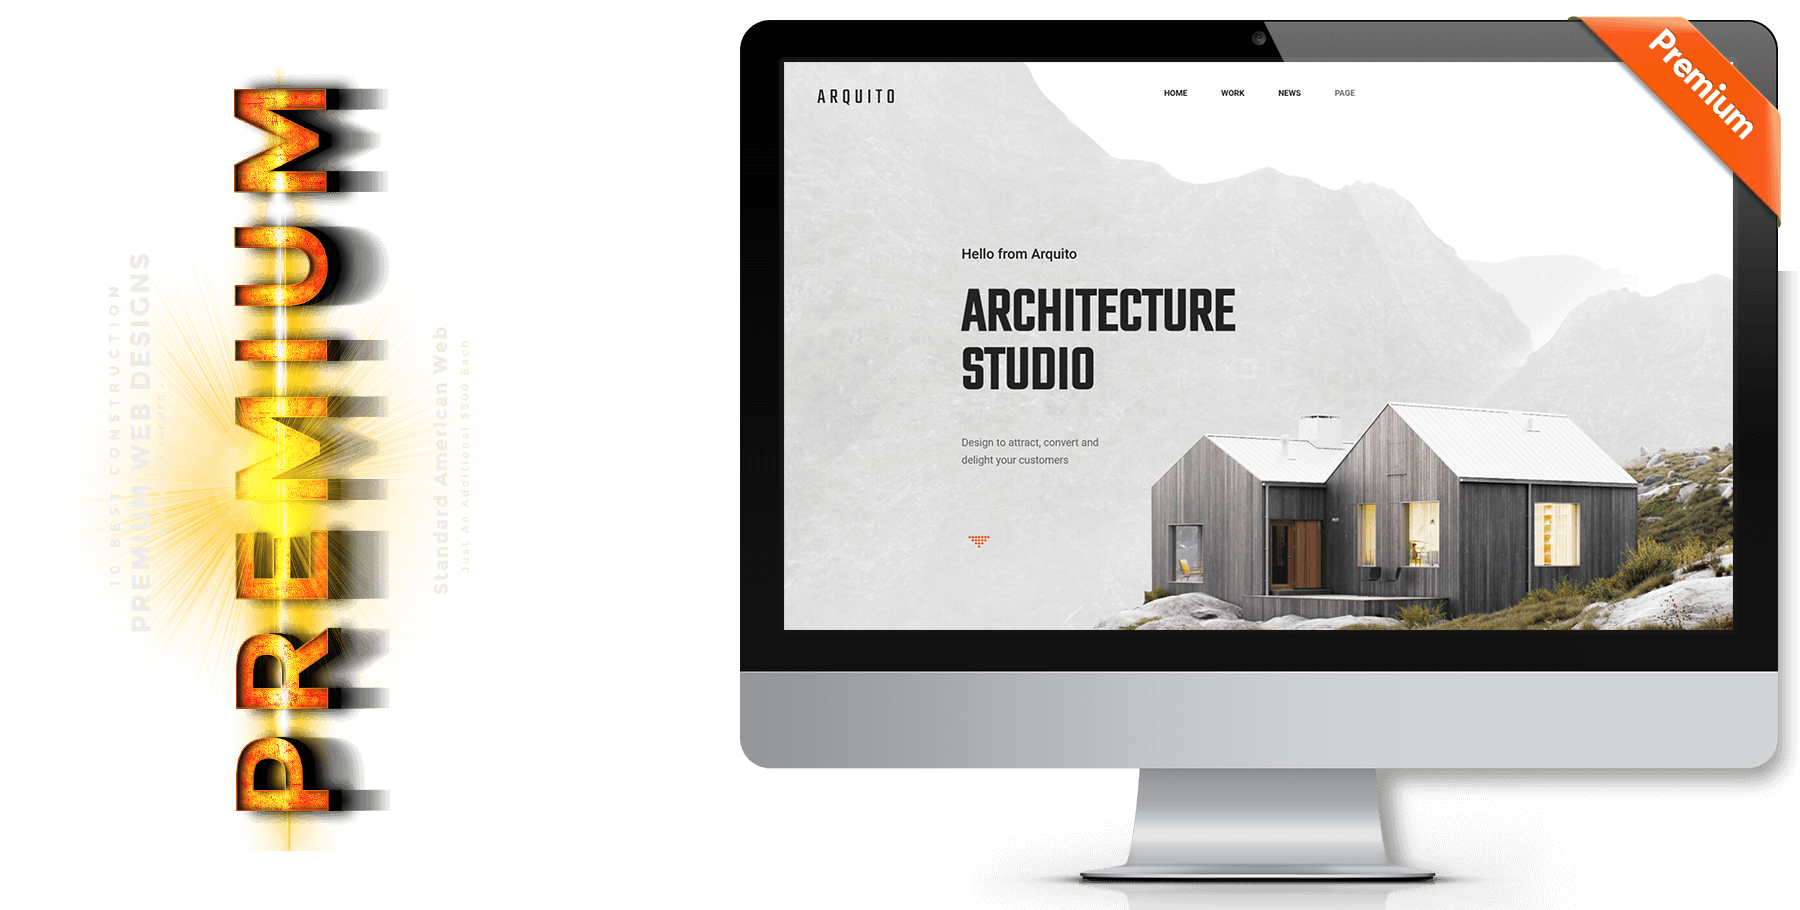 A website design in construction named Arquito